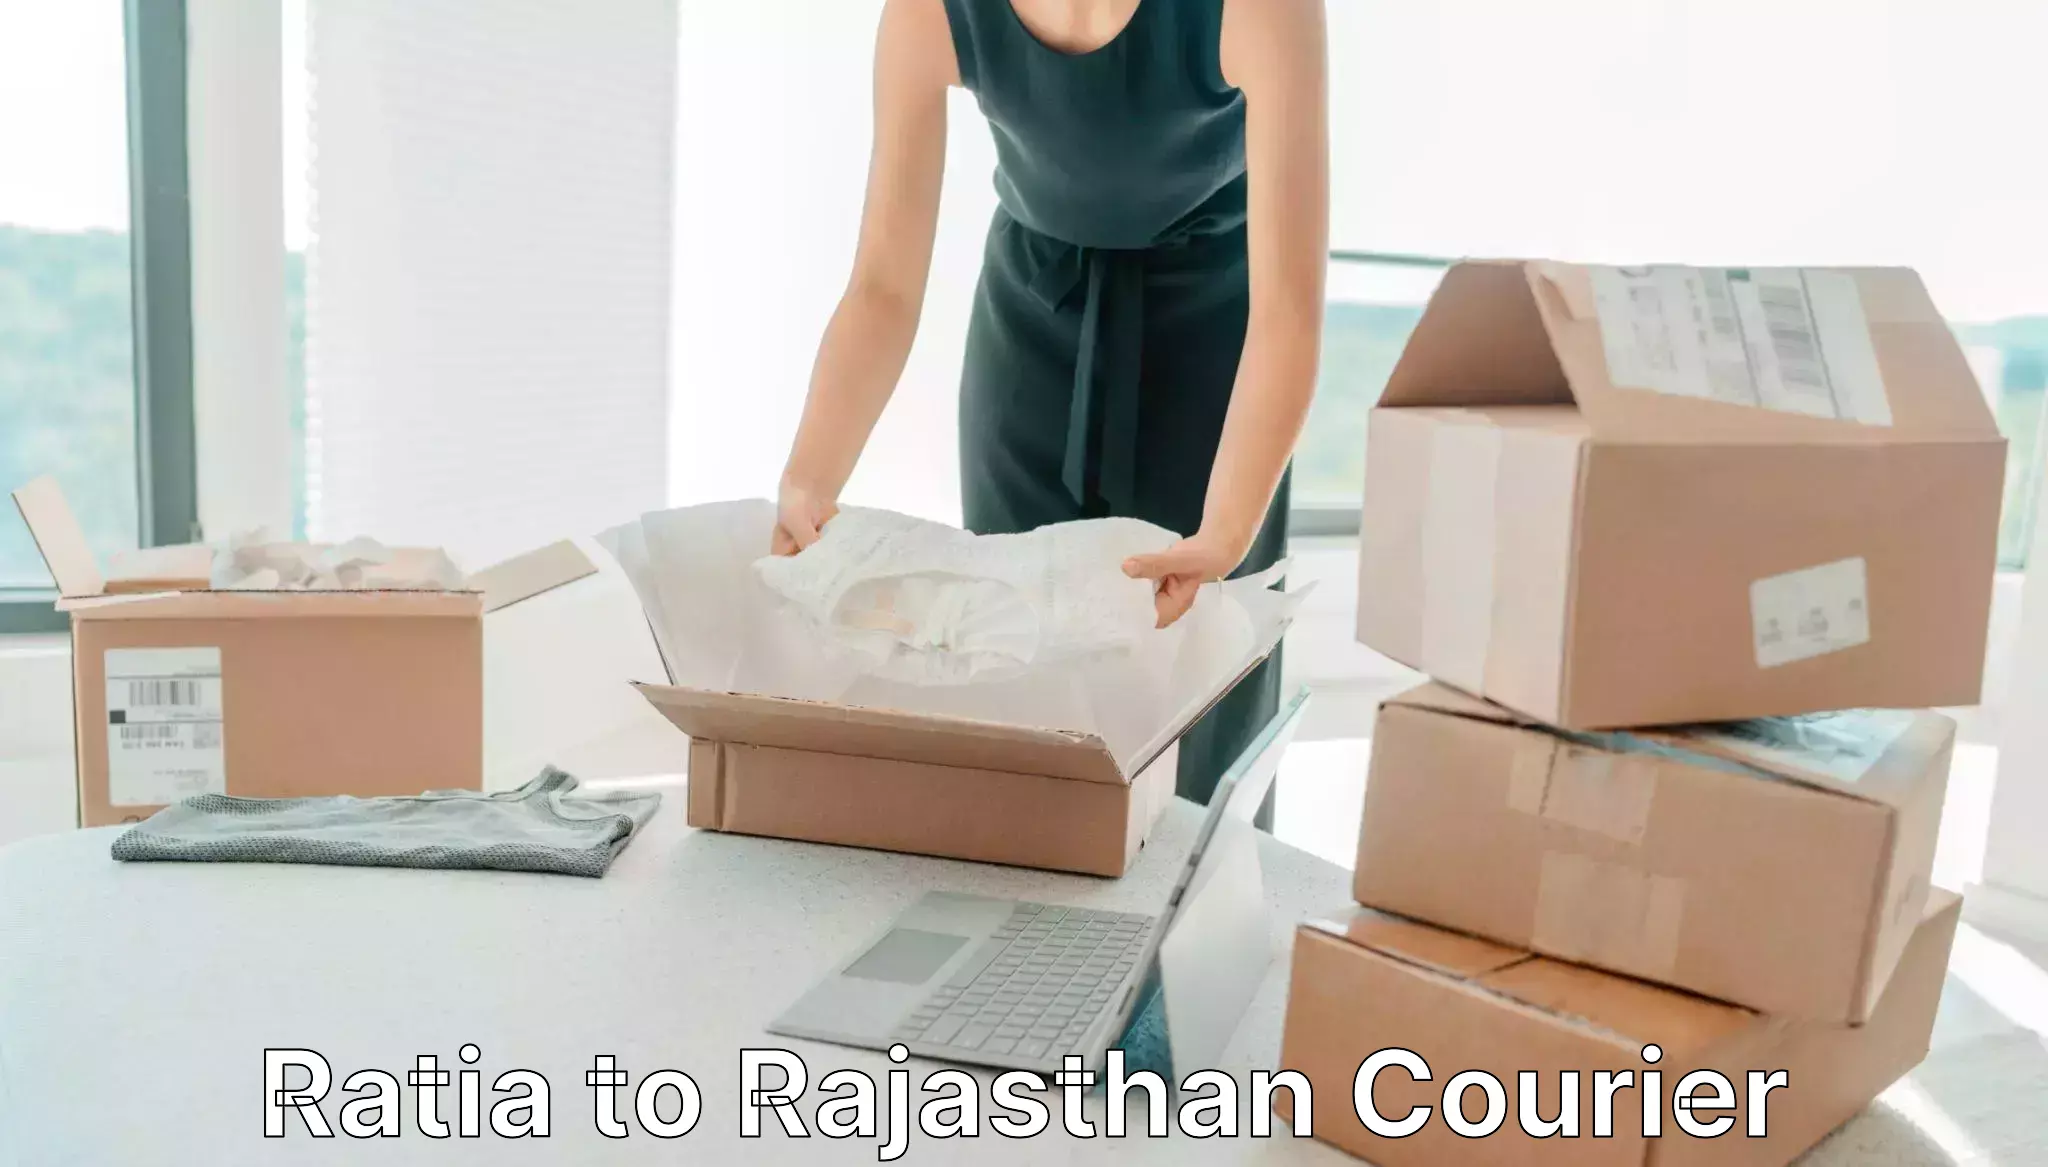 Express package services Ratia to Rajasthan